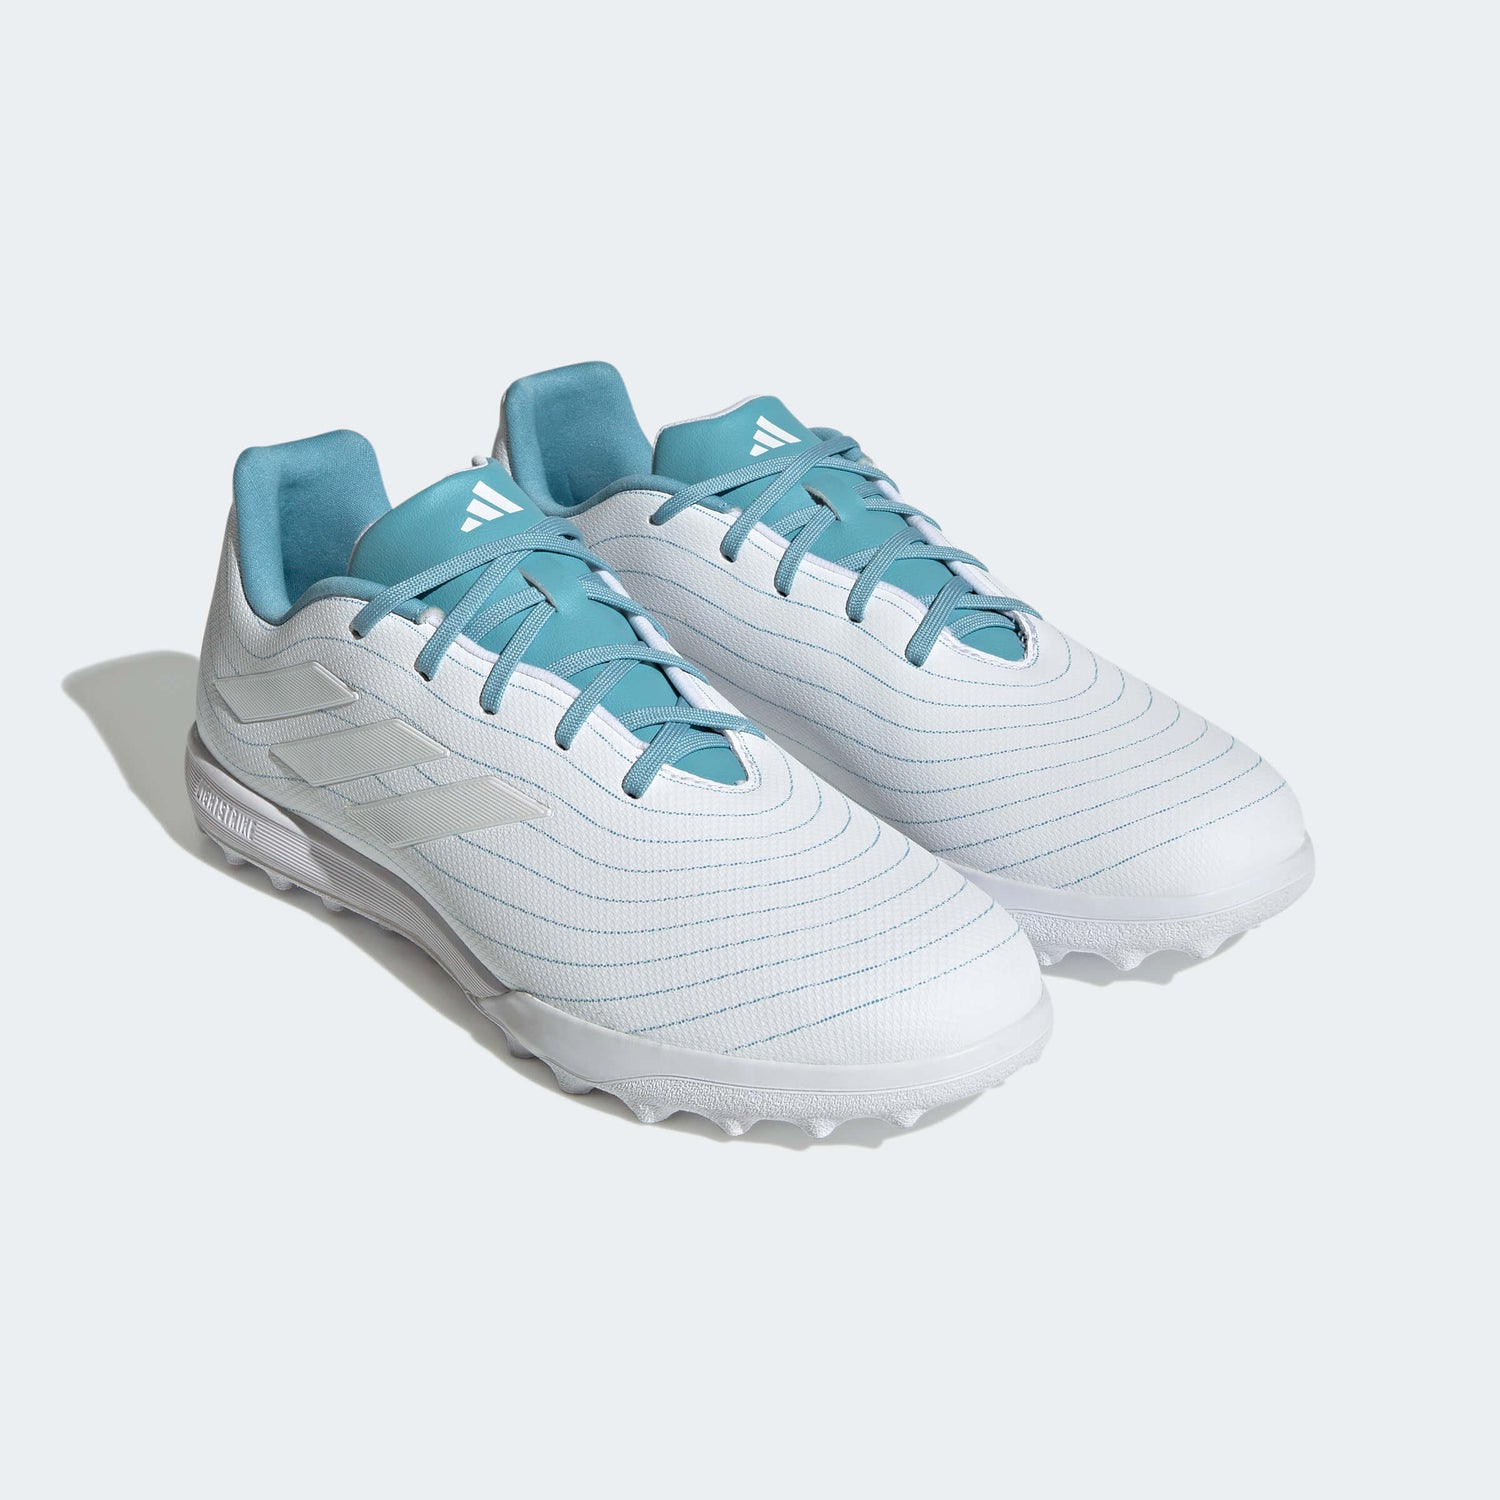 adidas Copa Pure .3 Turf - Parley Pack (SP23) (Pair - Front Lateral)